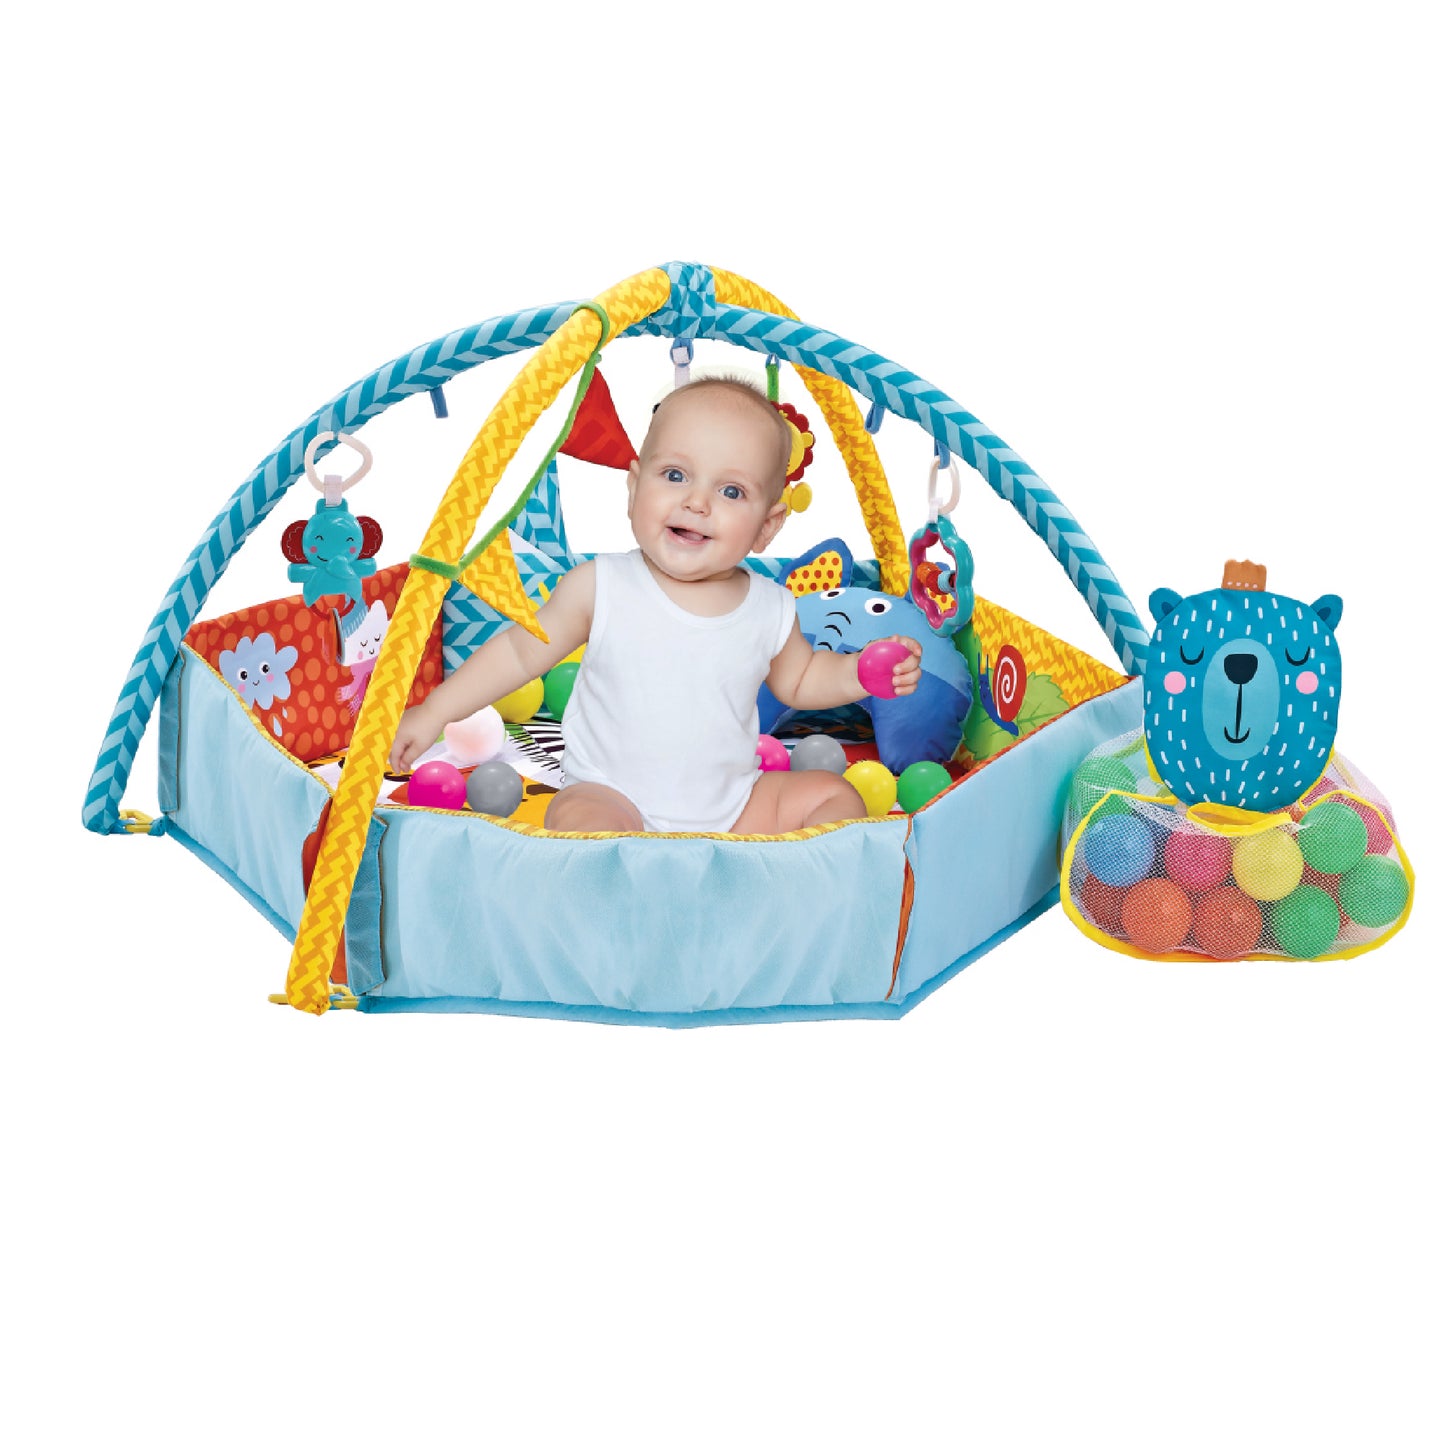 Snuggletime Jumbo Activity Gym and Ball Pit